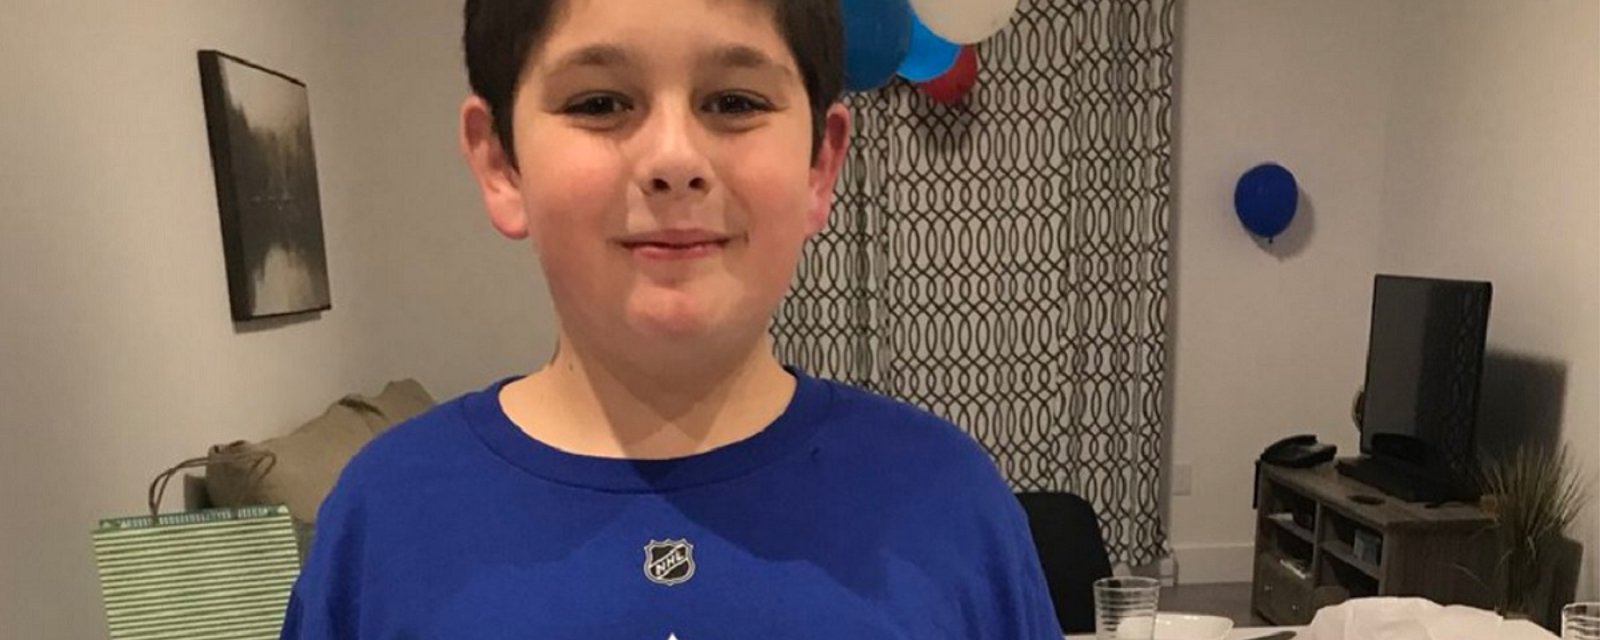 Maple Leafs surprise little boy who had no friends show up to his birthday party!